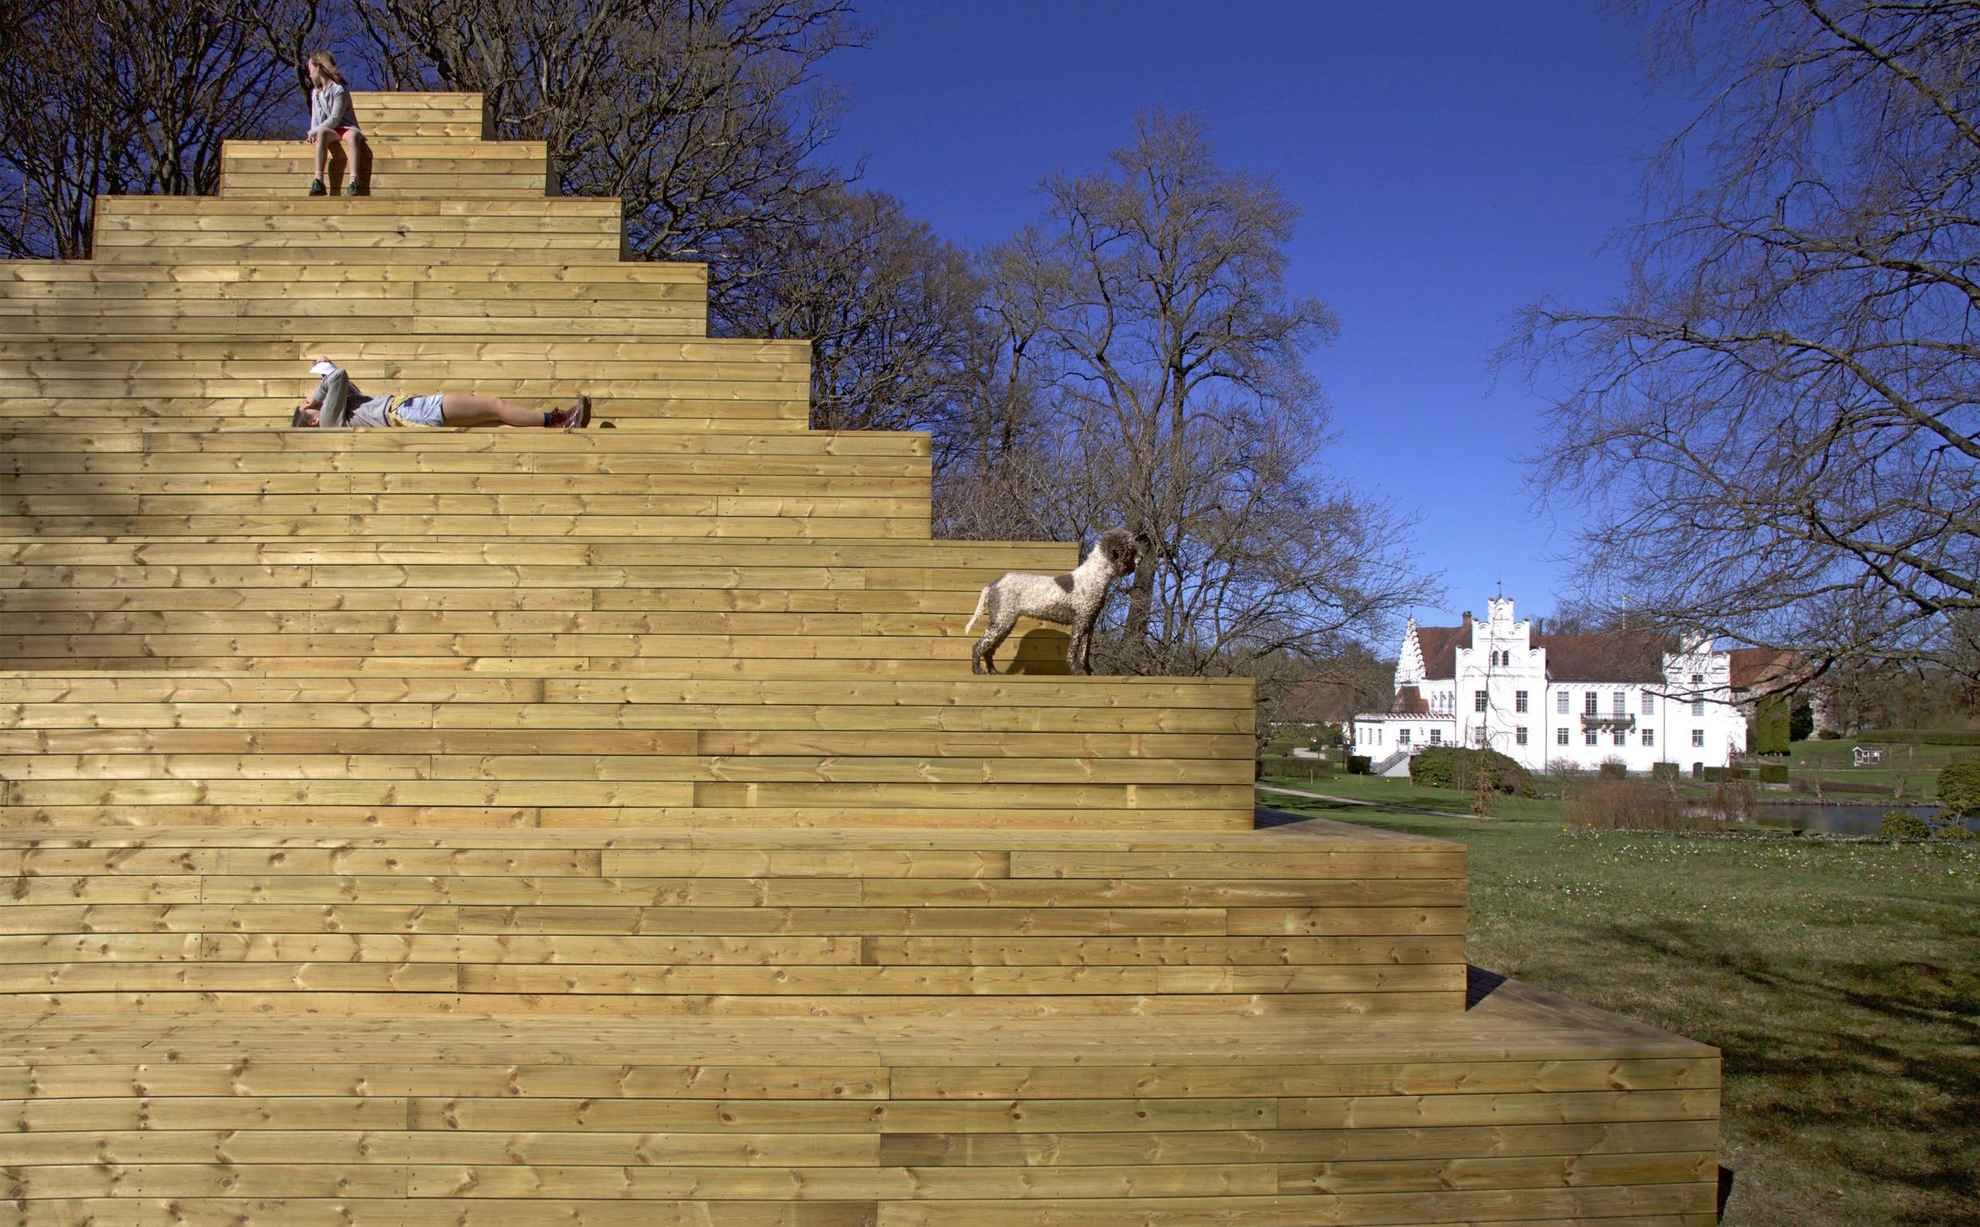 A sculpture named  Pyramide, made in wood as a place “where people would be able to hang out”. A dog standing on the pyramid, a person is sitting on the top and another one is lying in the middle. A large white house in the background.